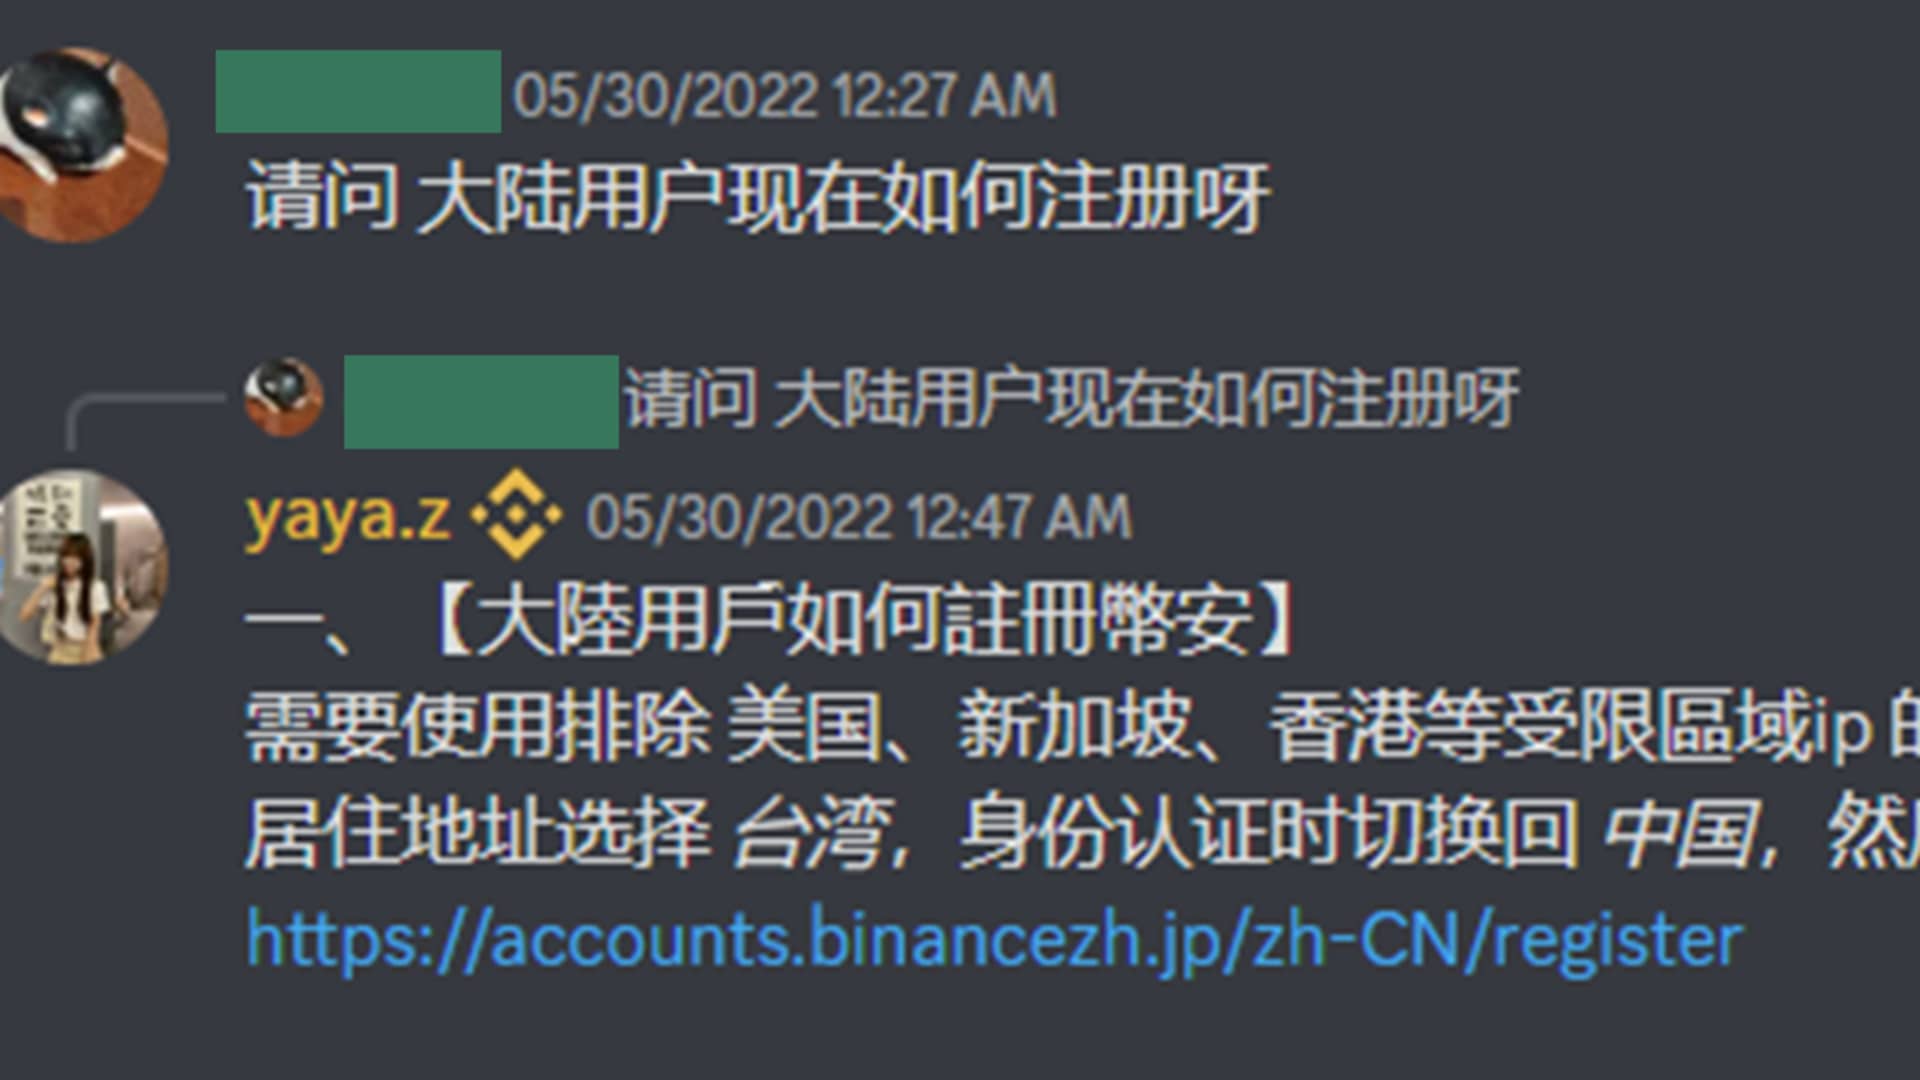 Messages obtained by CNBC from Binance's Chinese-language Discord server.